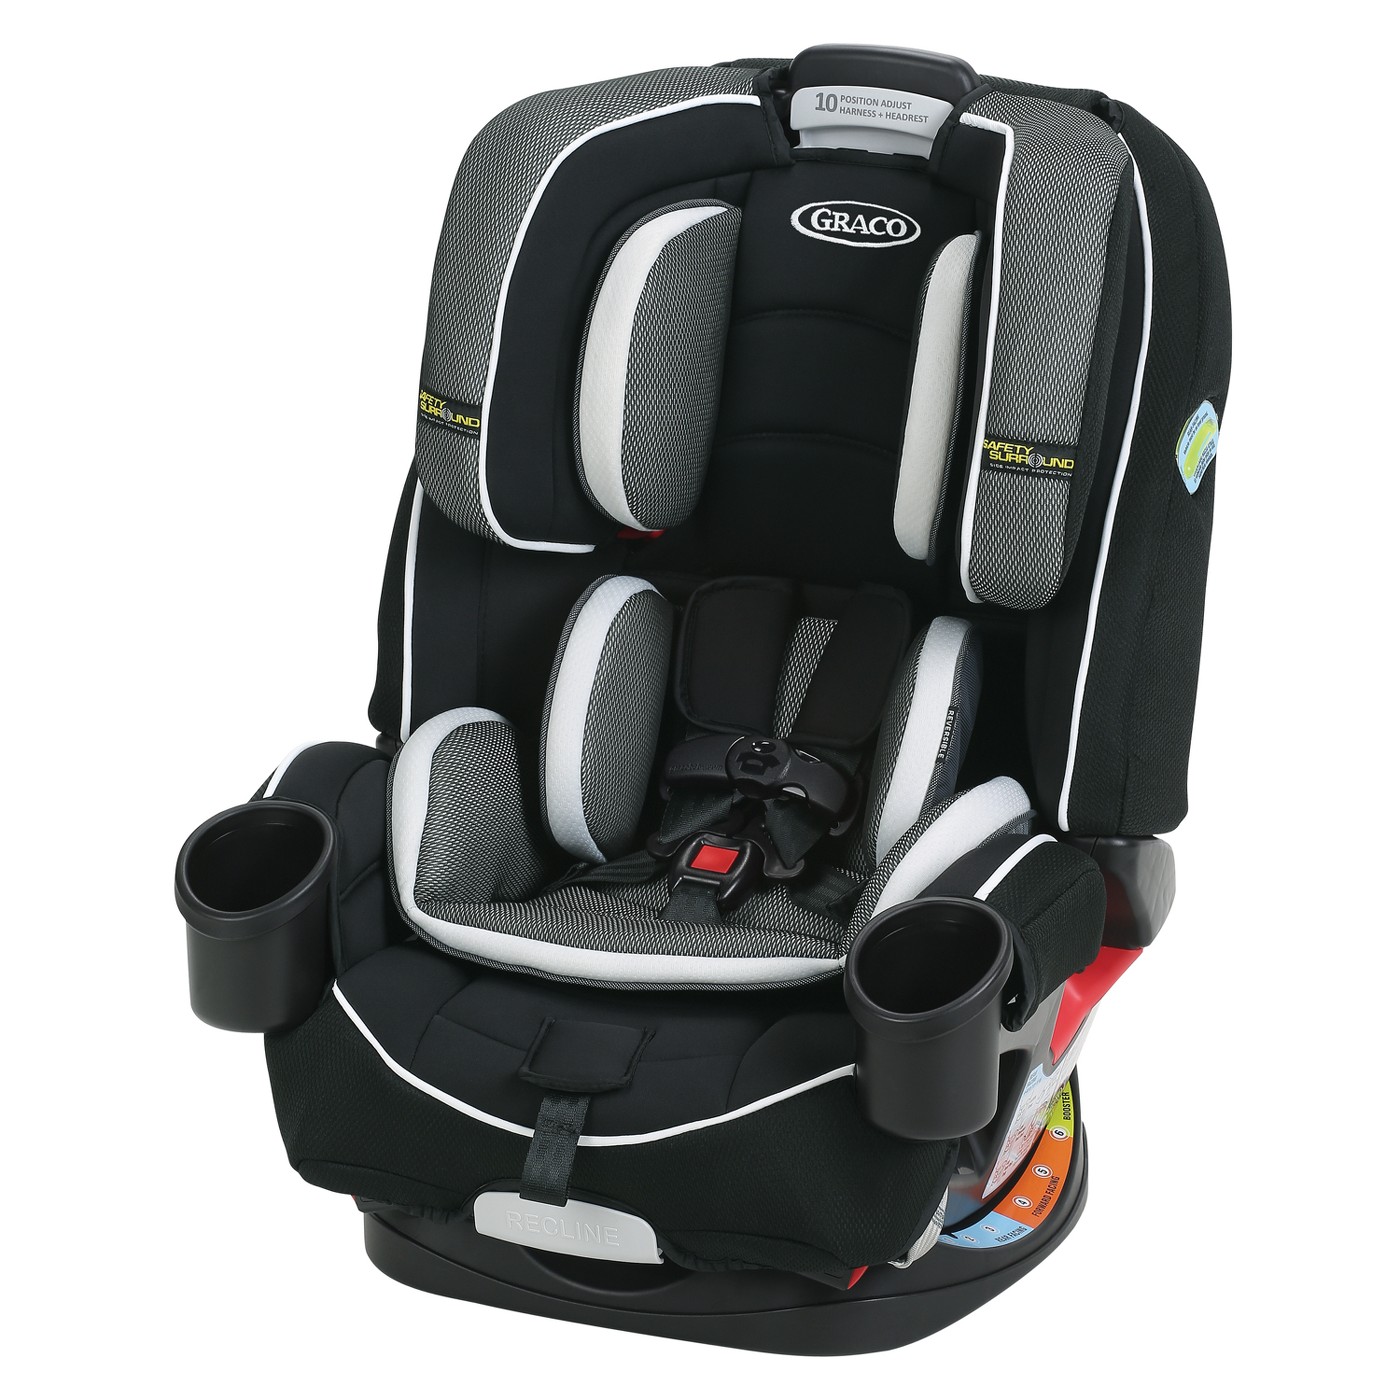 Graco 4-Ever All-In-One Convertible Car Seat - Jacks - image 1 of 12